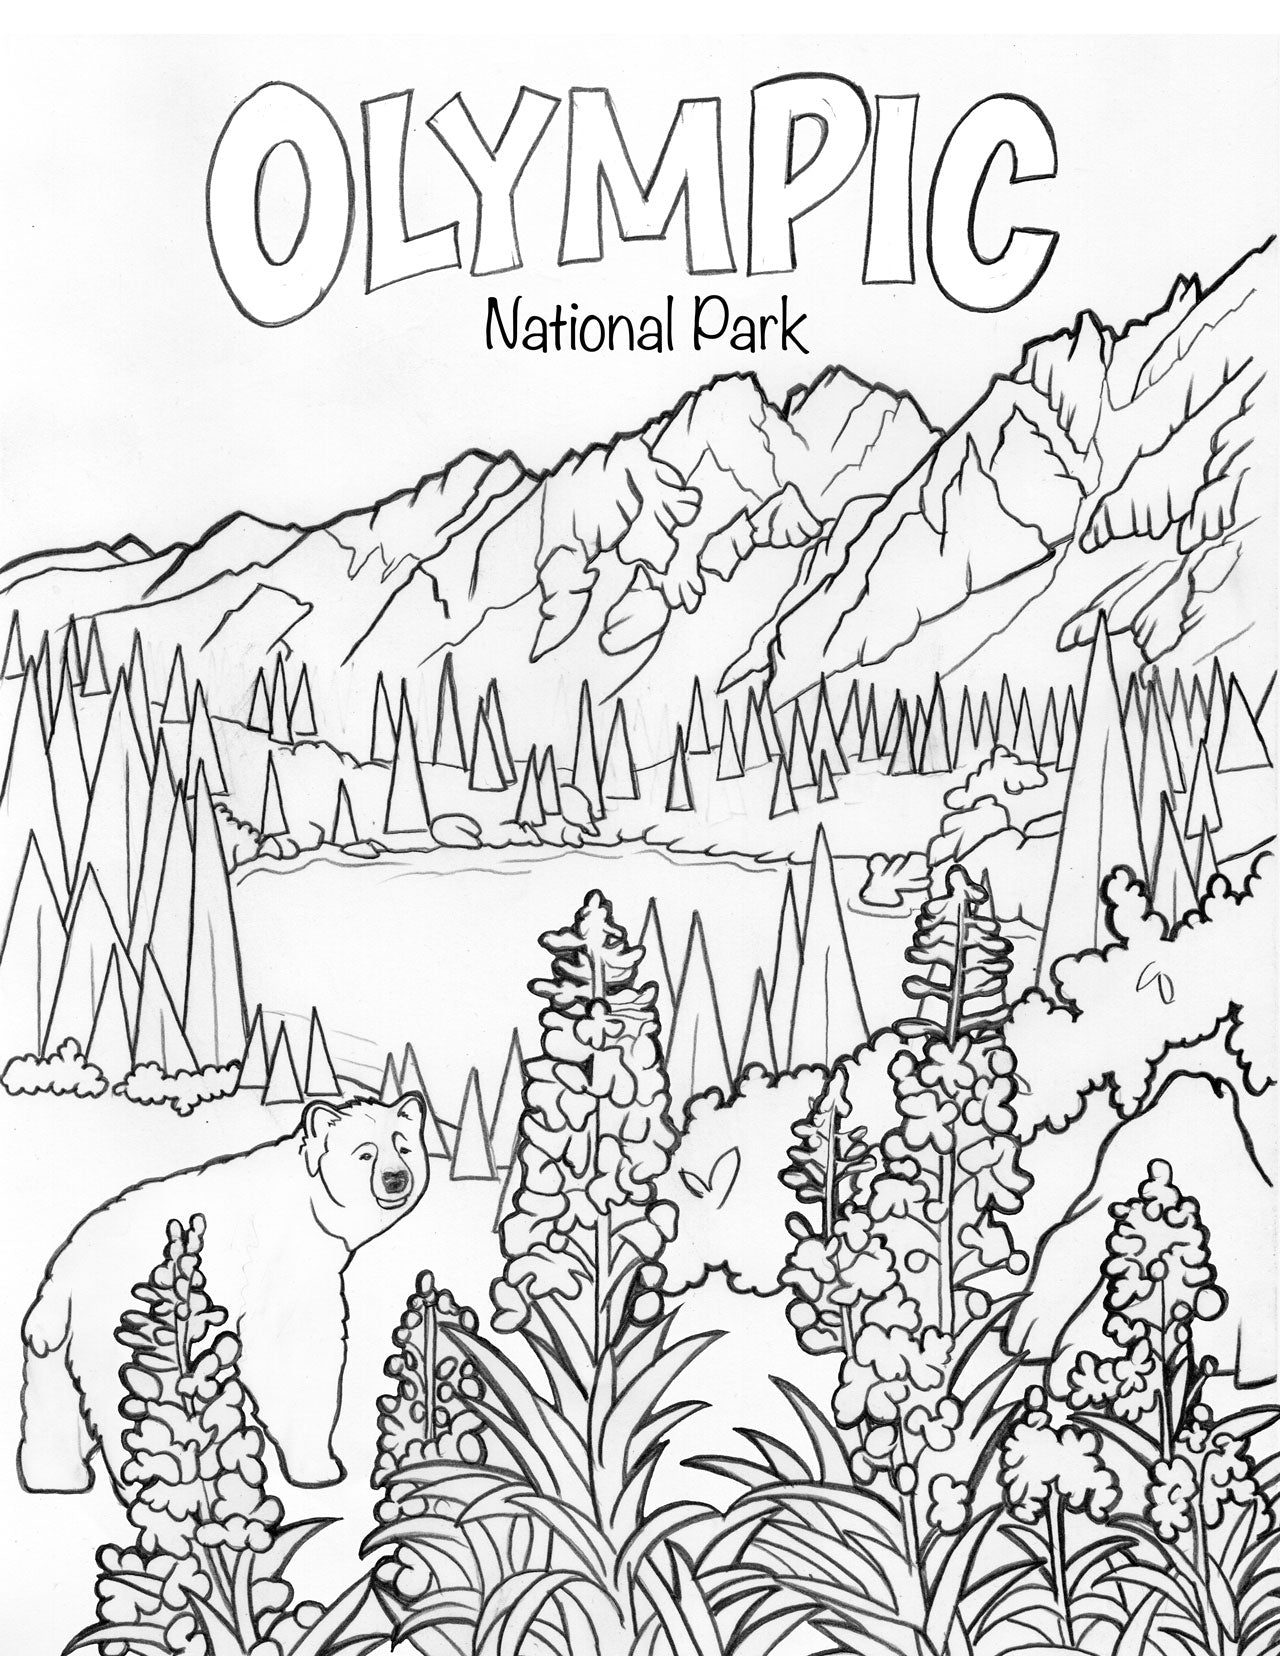 Olympic National Park coloring book cover